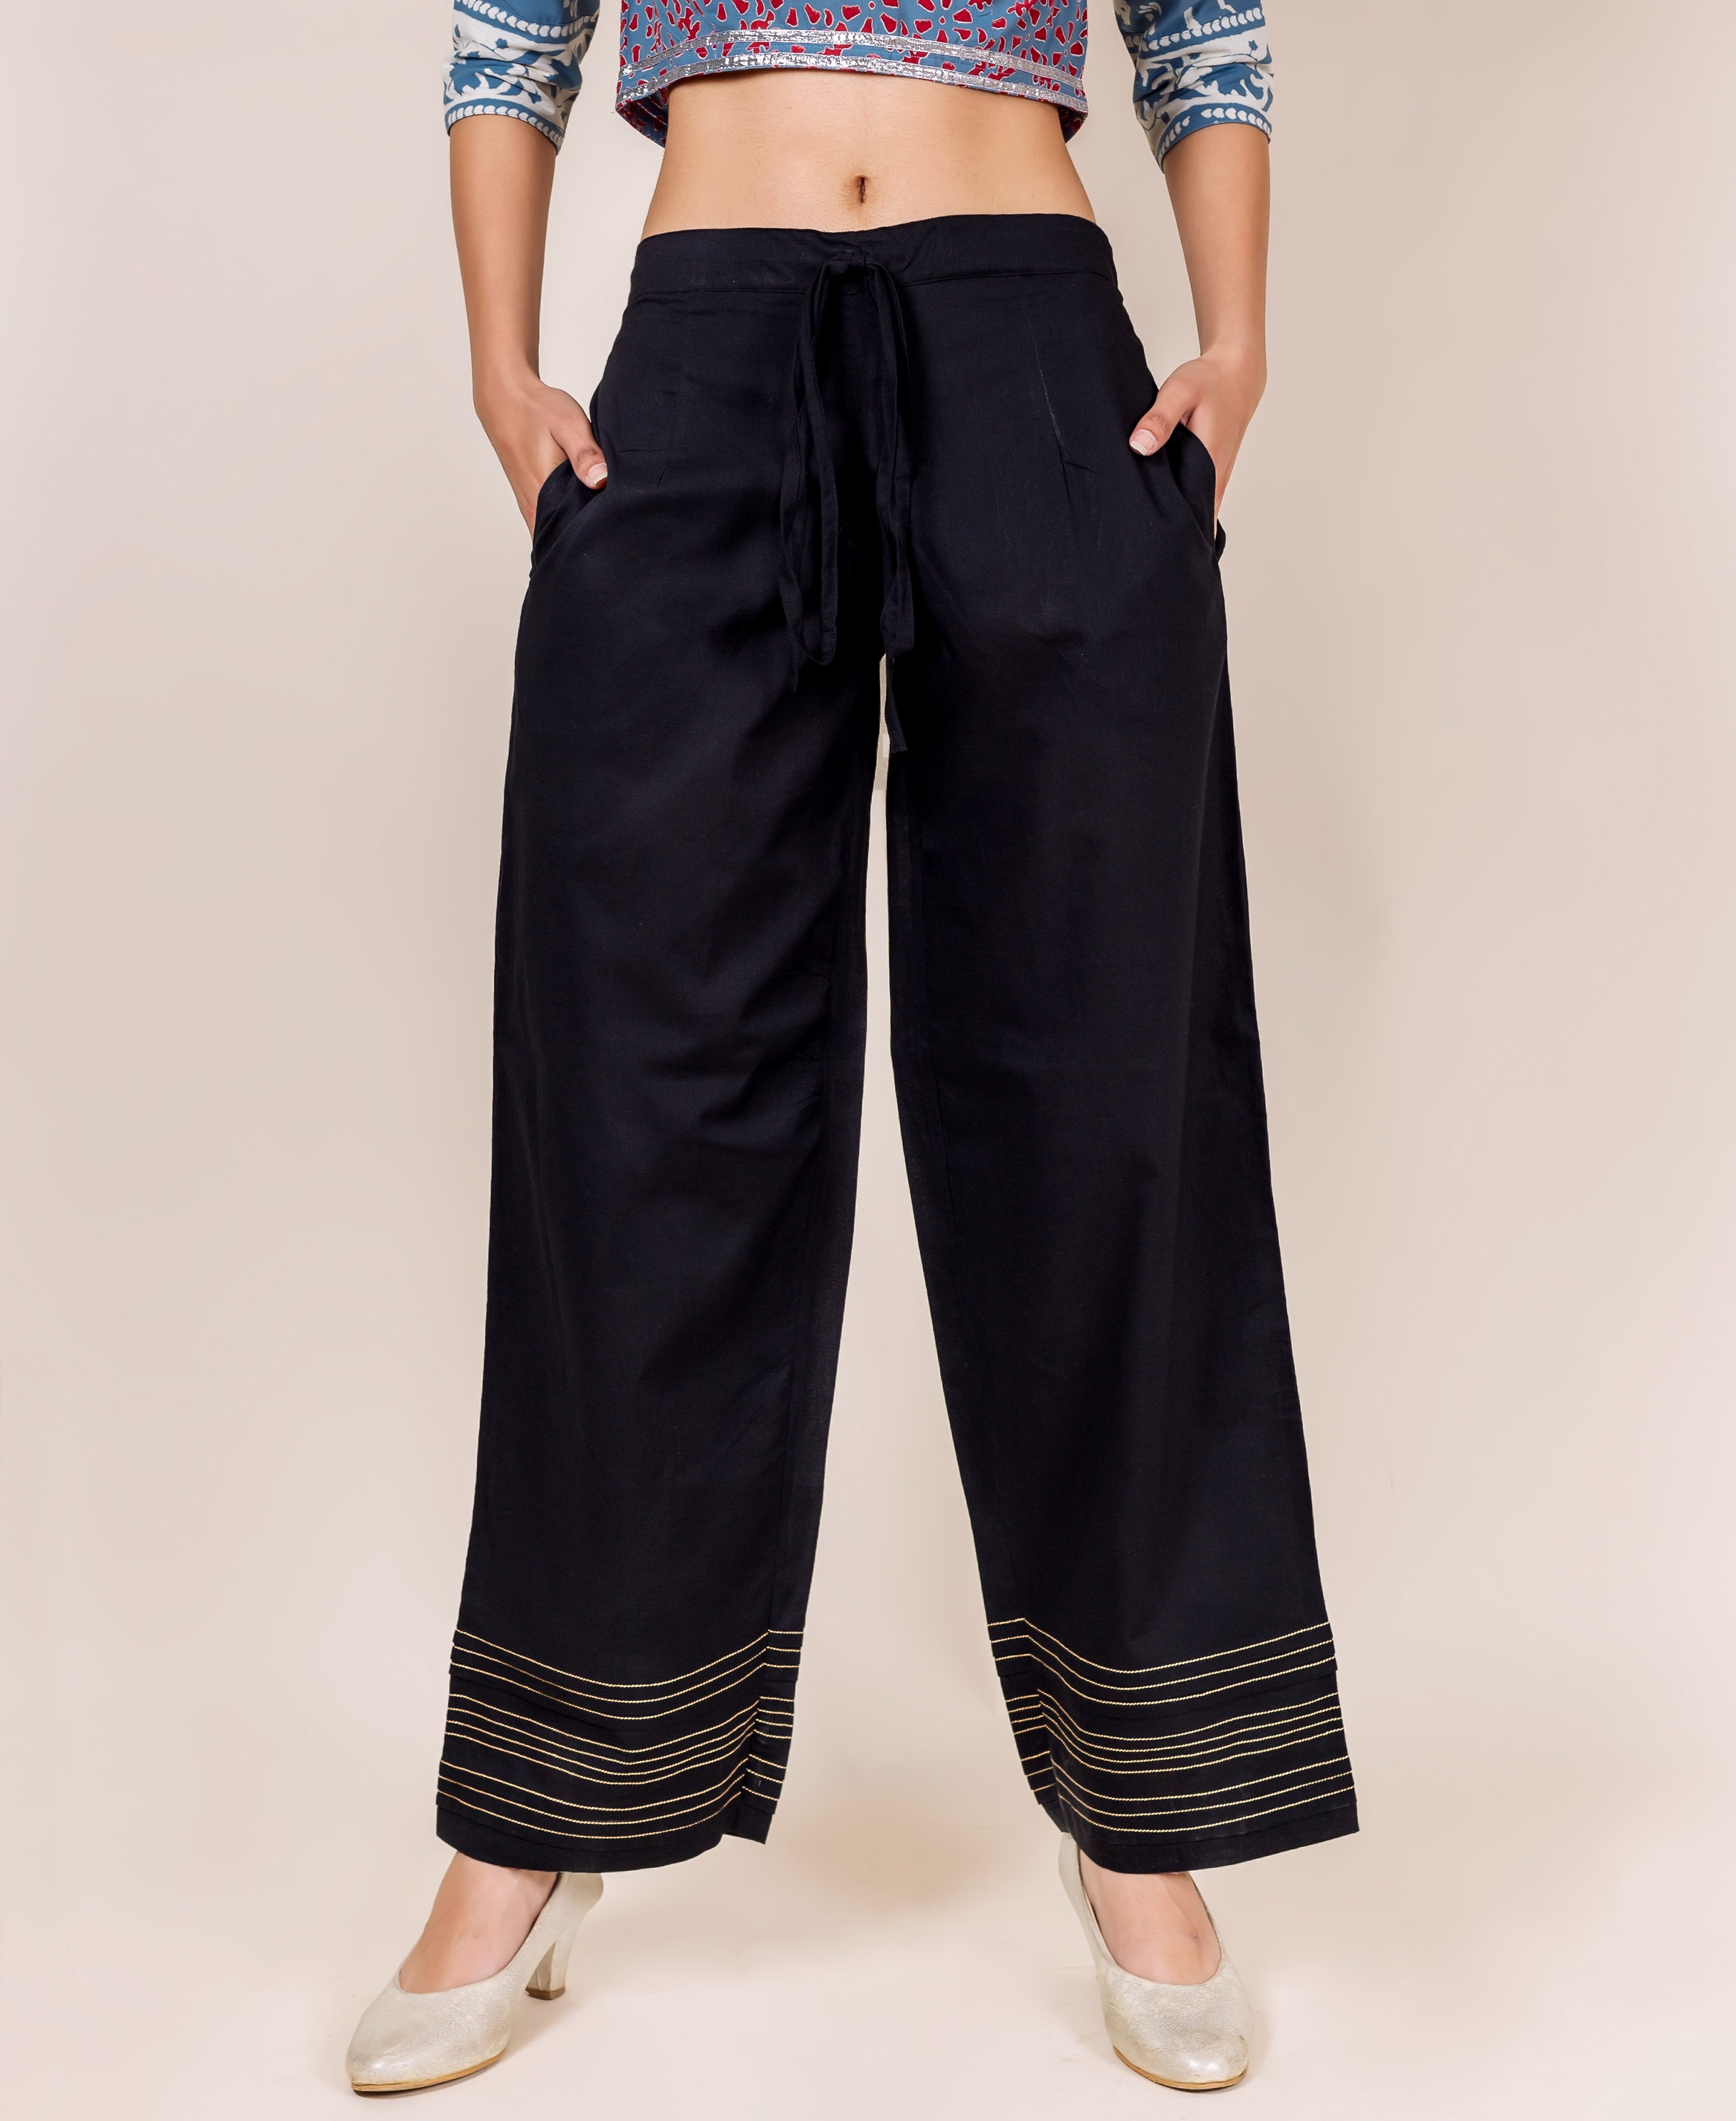 Shop Pleated Palazzo Pants for Women from latest collection at Forever 21   602502